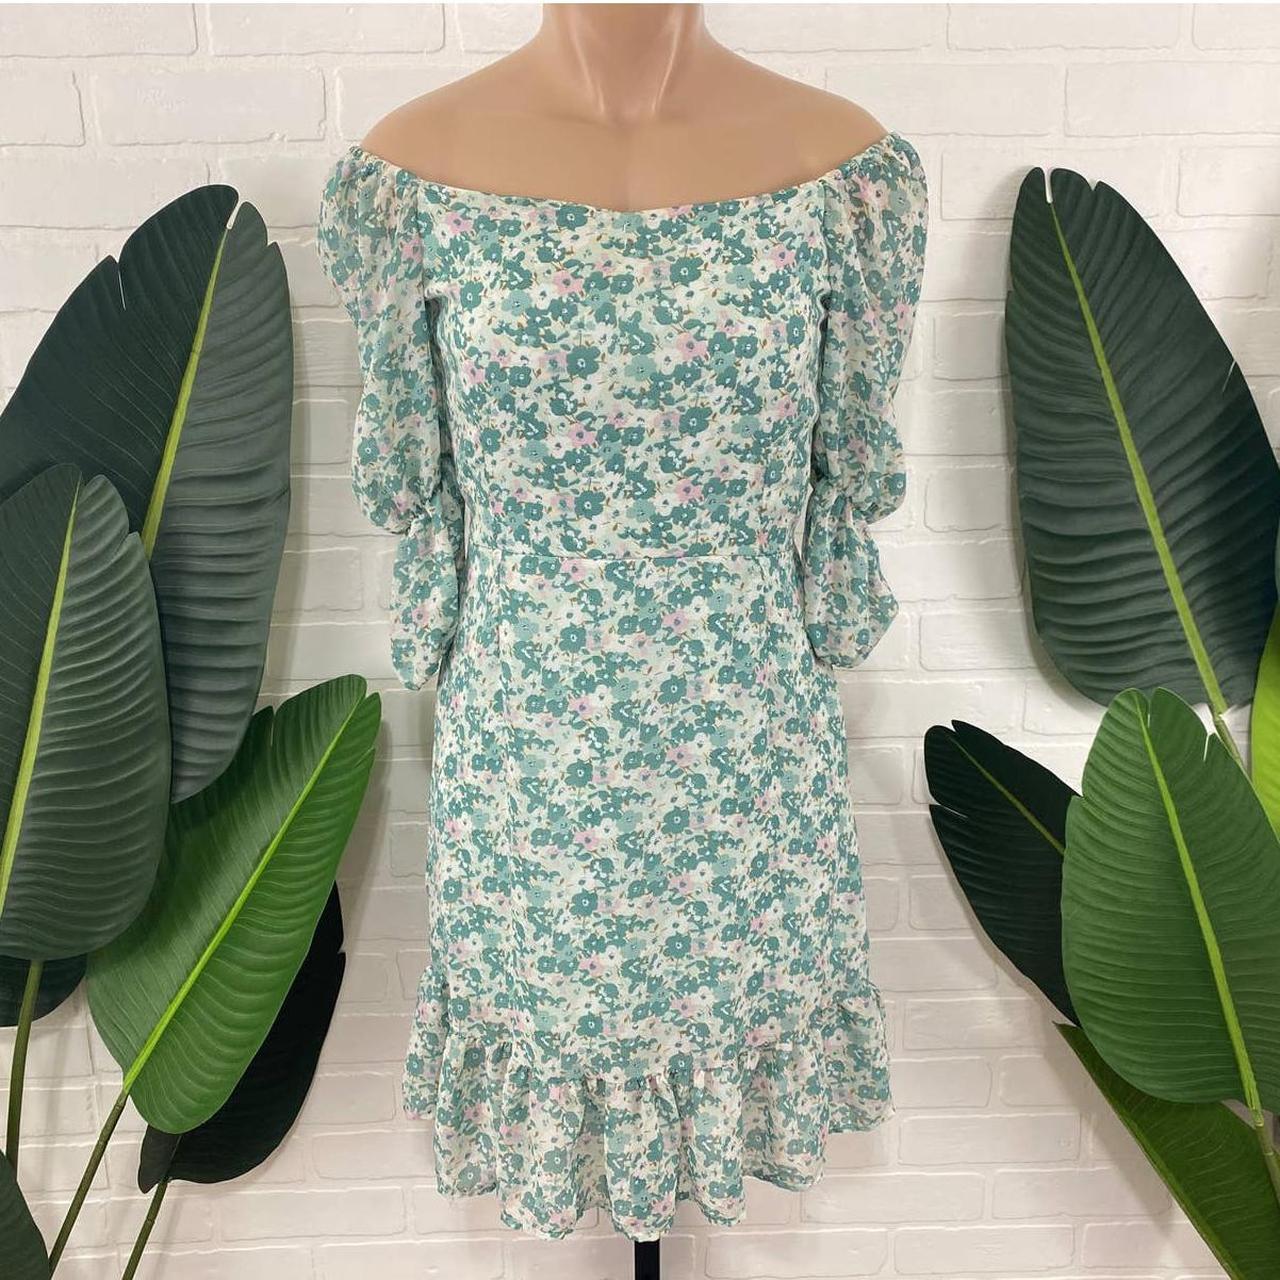 Product Image 1 - No Paypal

Floral green sundress. Can